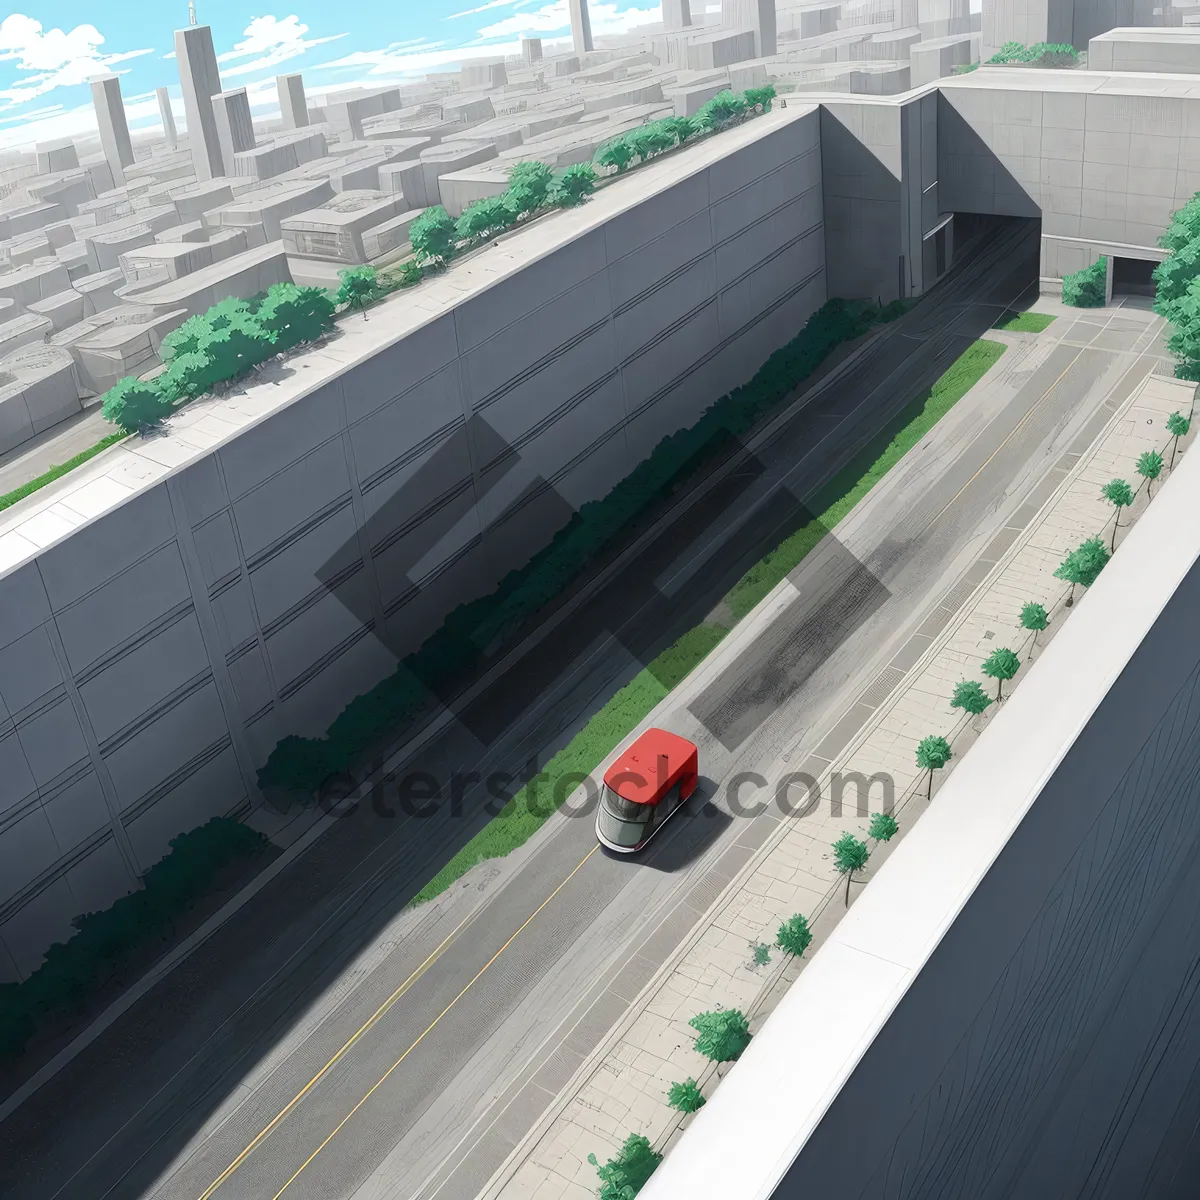 Picture of Urban Highway: Blurred Motion of Modern City Traffic